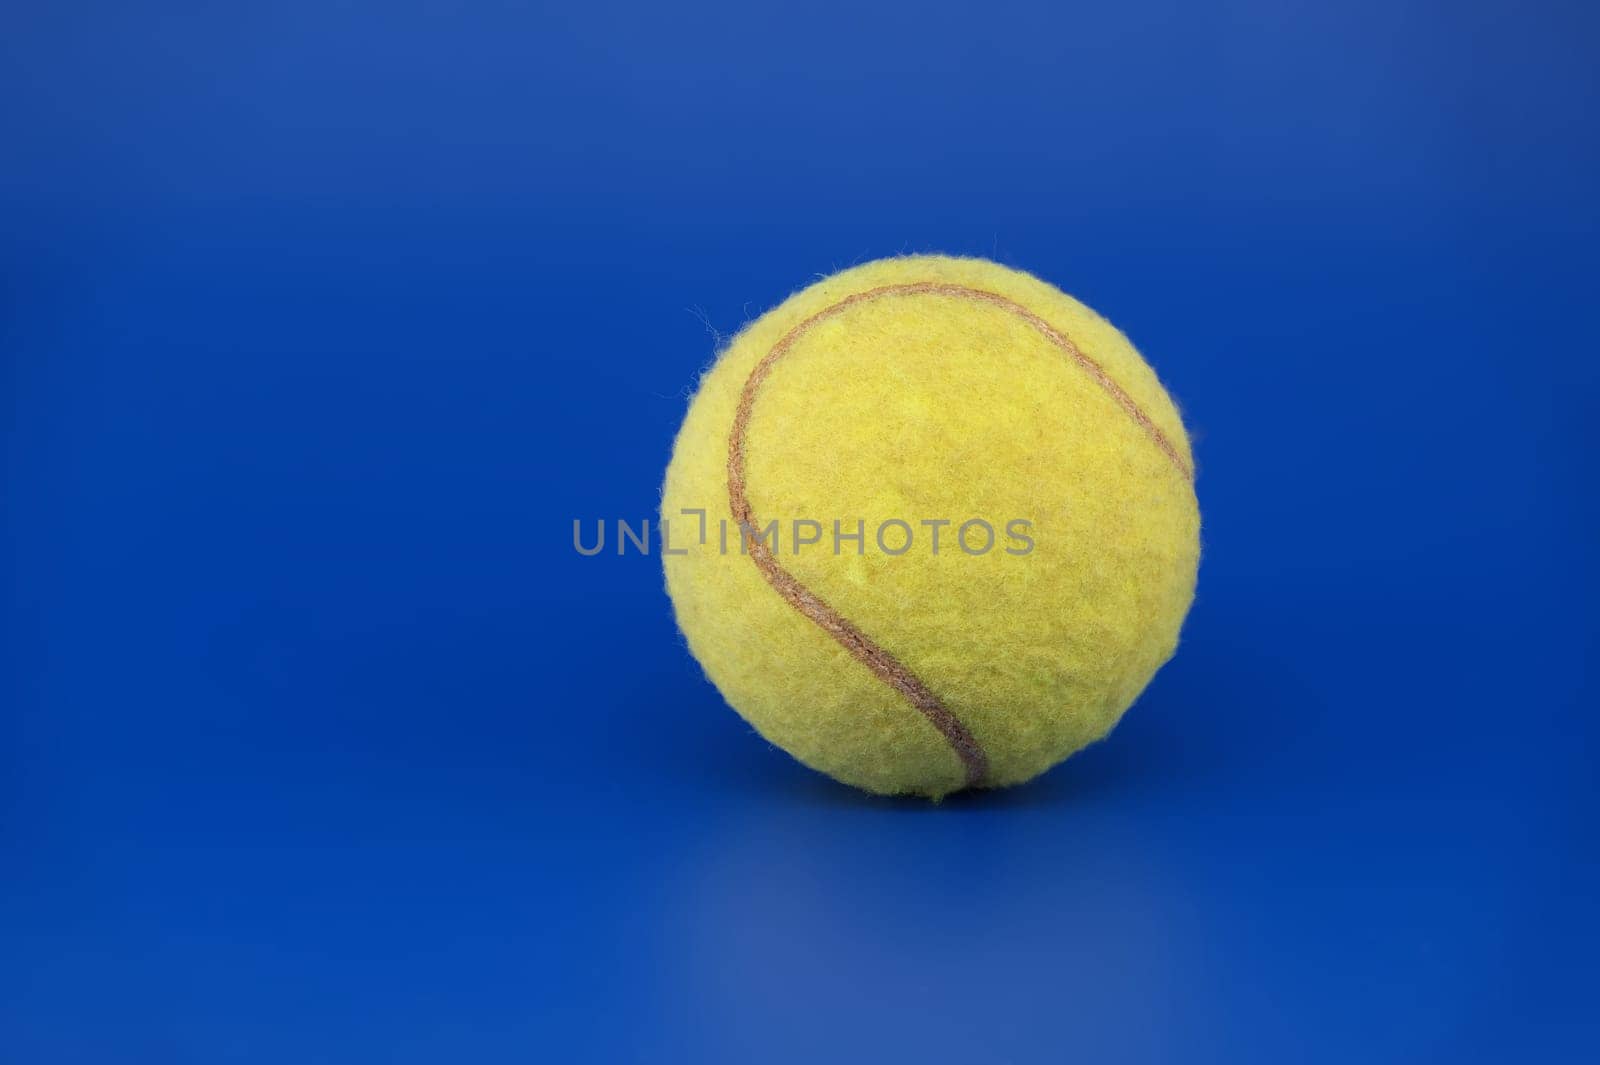 Yellow tennis ball on a bright blue background with free copy space in close up view